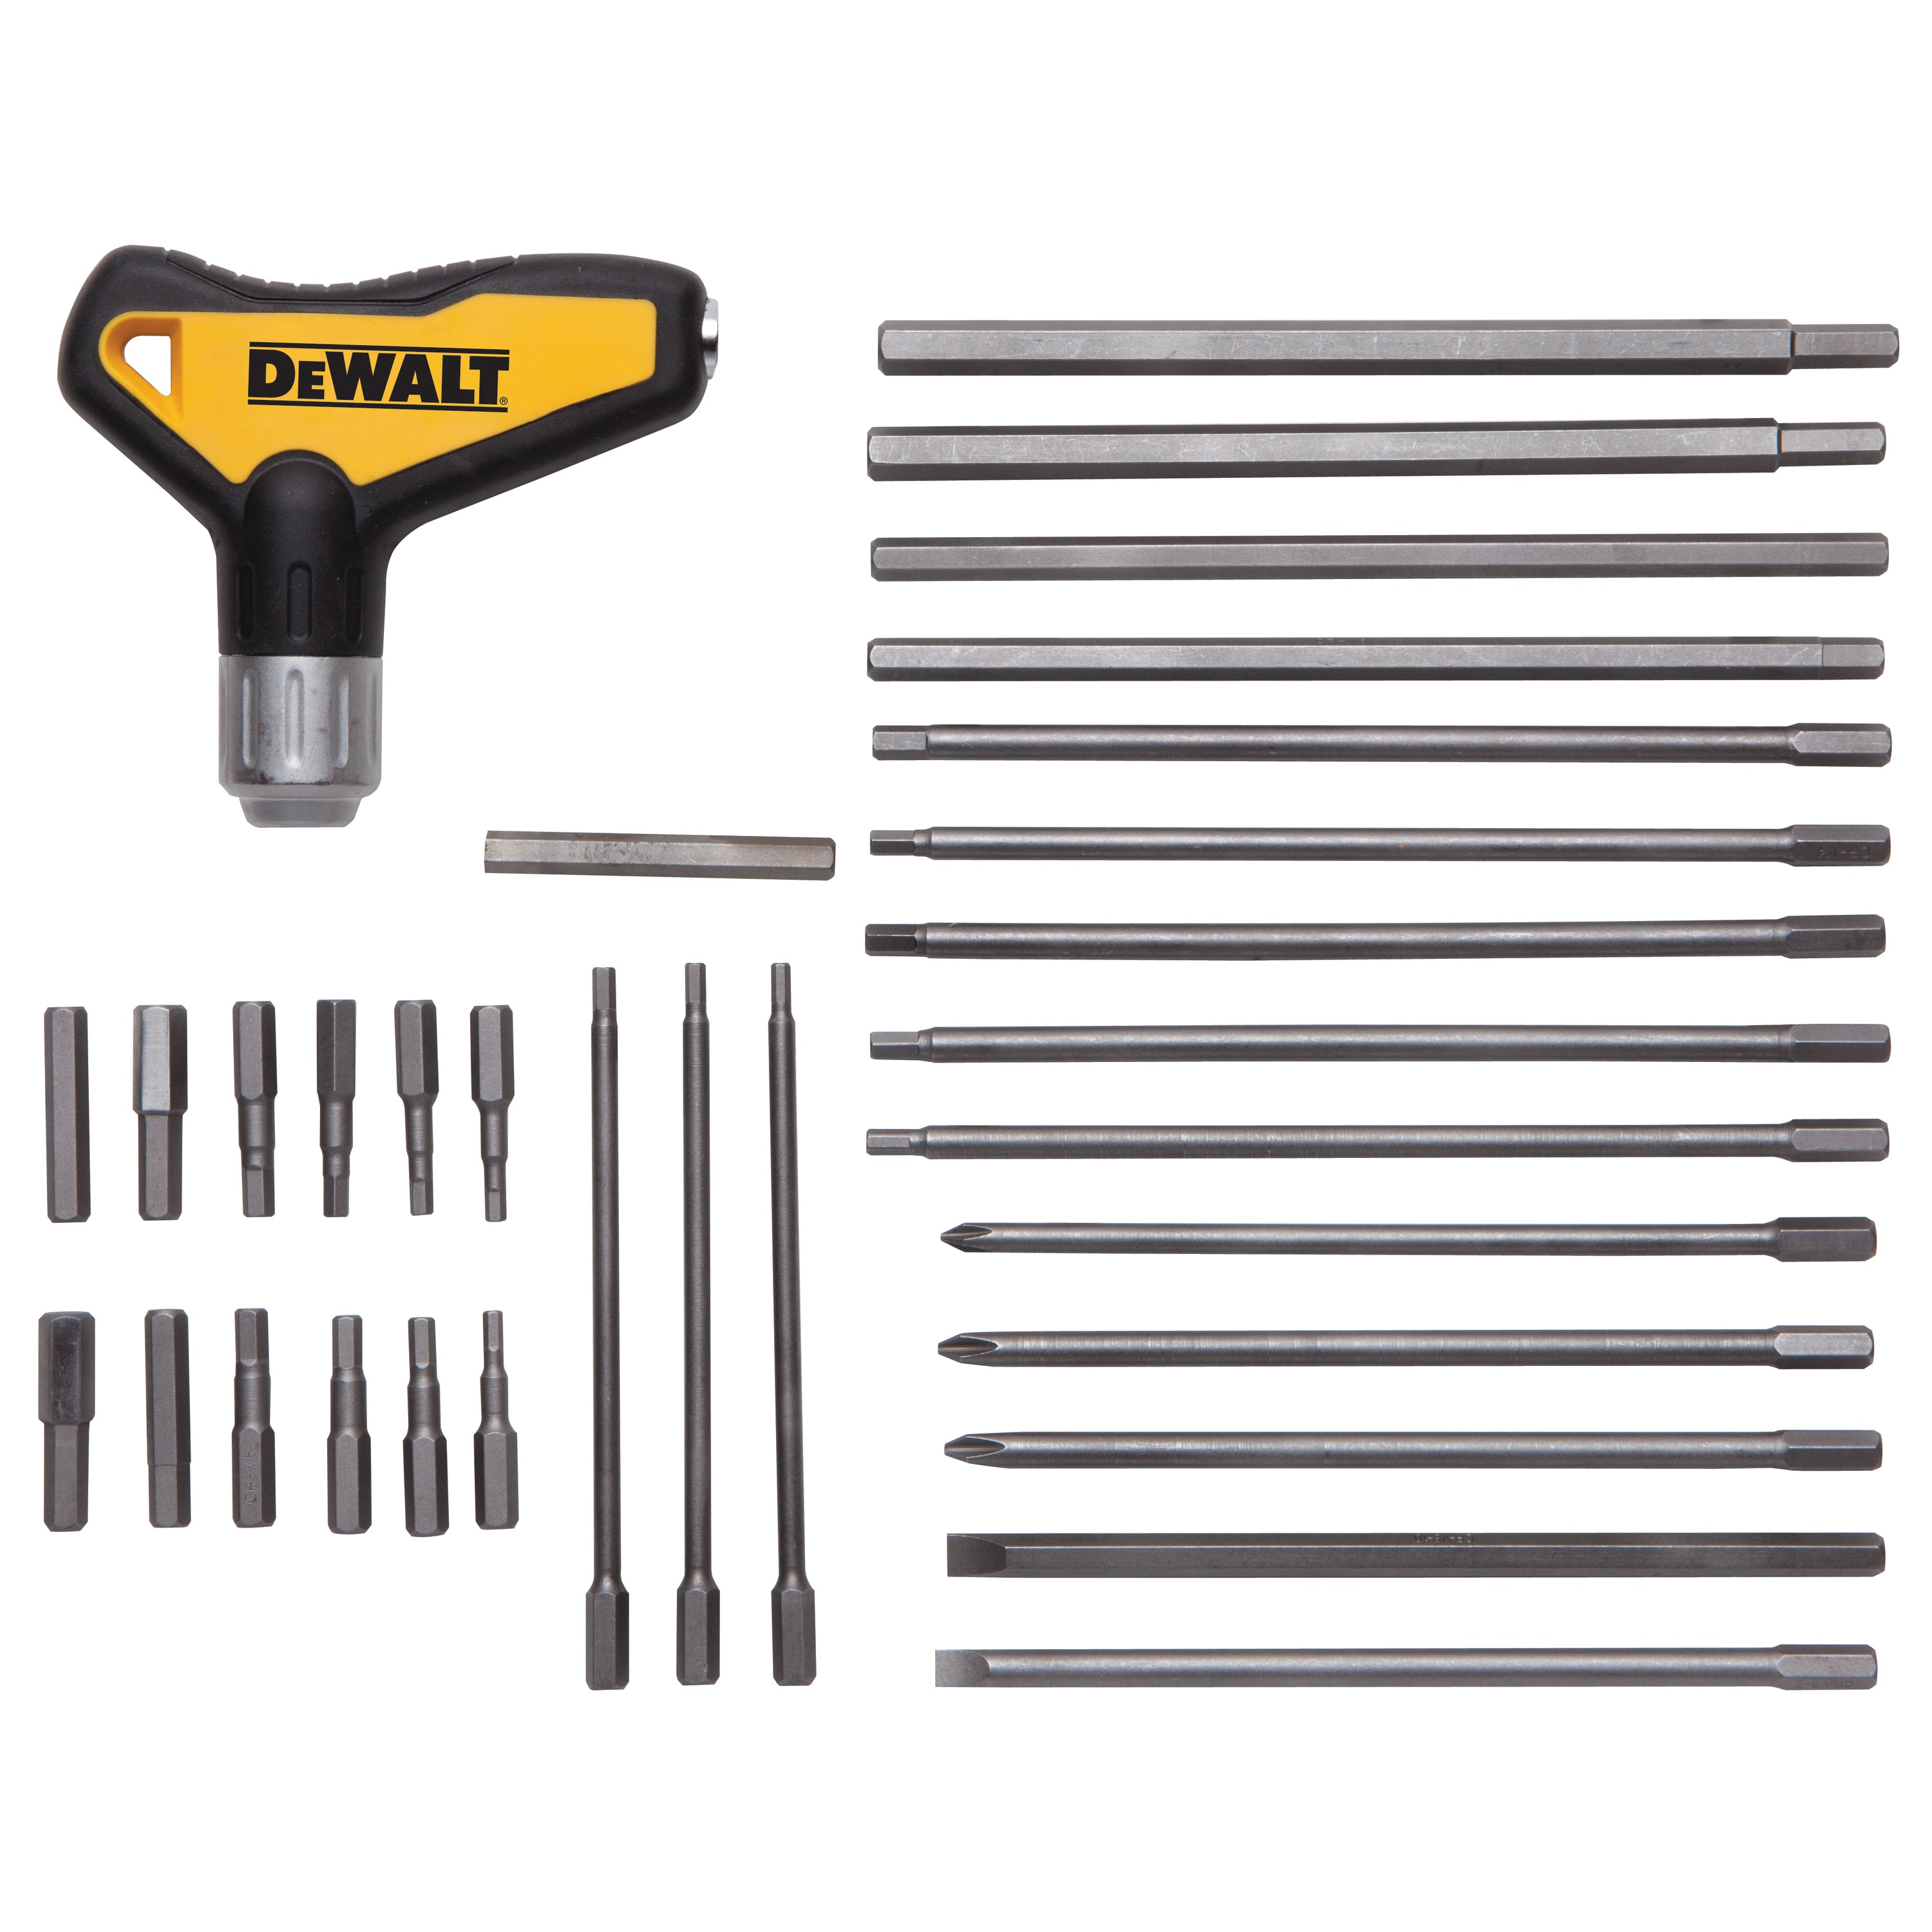 31 piece Ratcheting T Handle Hex Key Set without its tray.